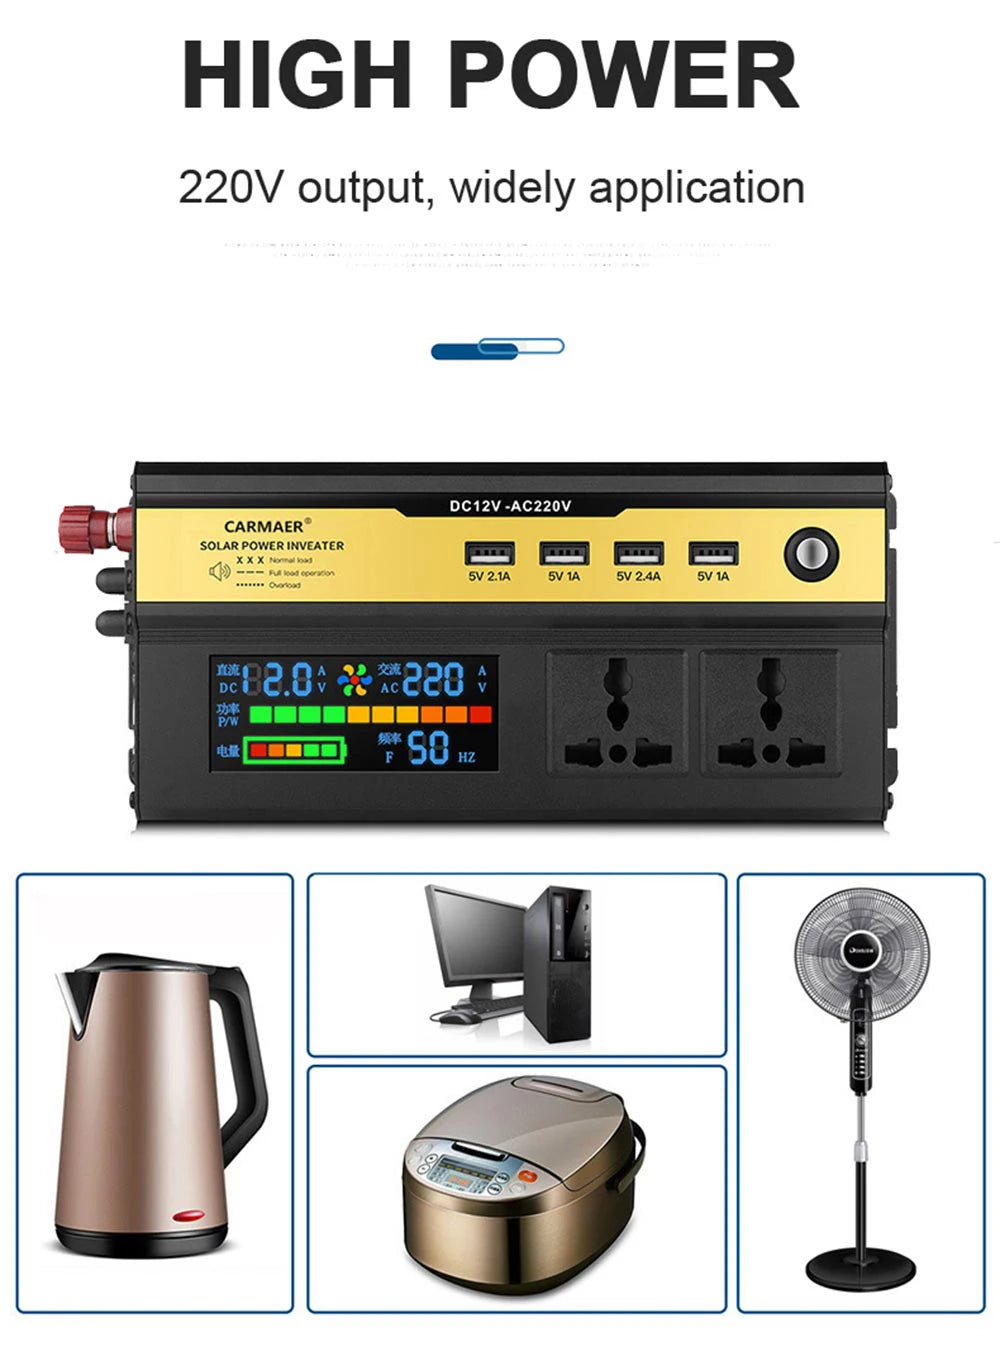 Powerful inverter with 220V output for solar power and car charging, with DC input range and USB charging.